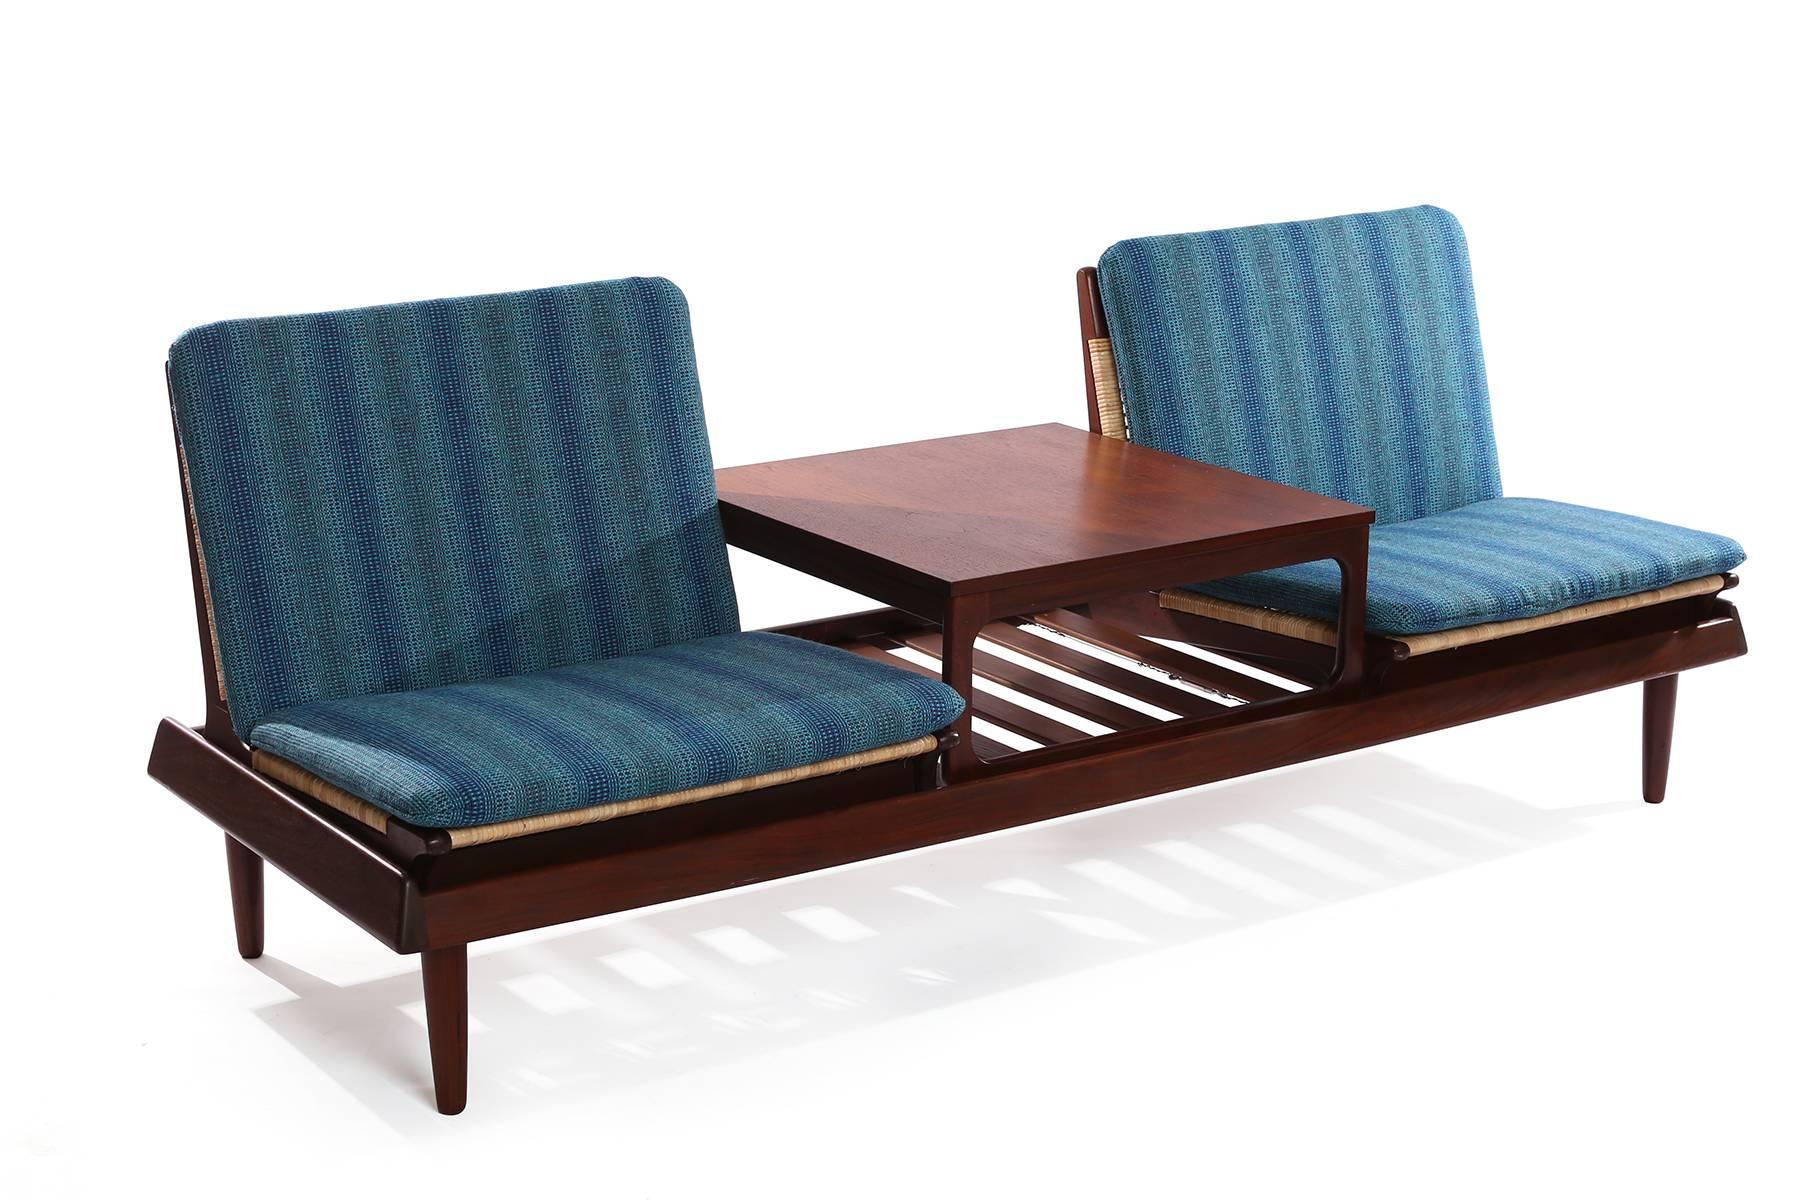 Seldom seen Hans Olsen modular seating, circa late 1950s. This versatile and stunning example has two low chairs and table that sit atop a bench.
The chairs and table are movable and removable so that they can sit in different configurations atop